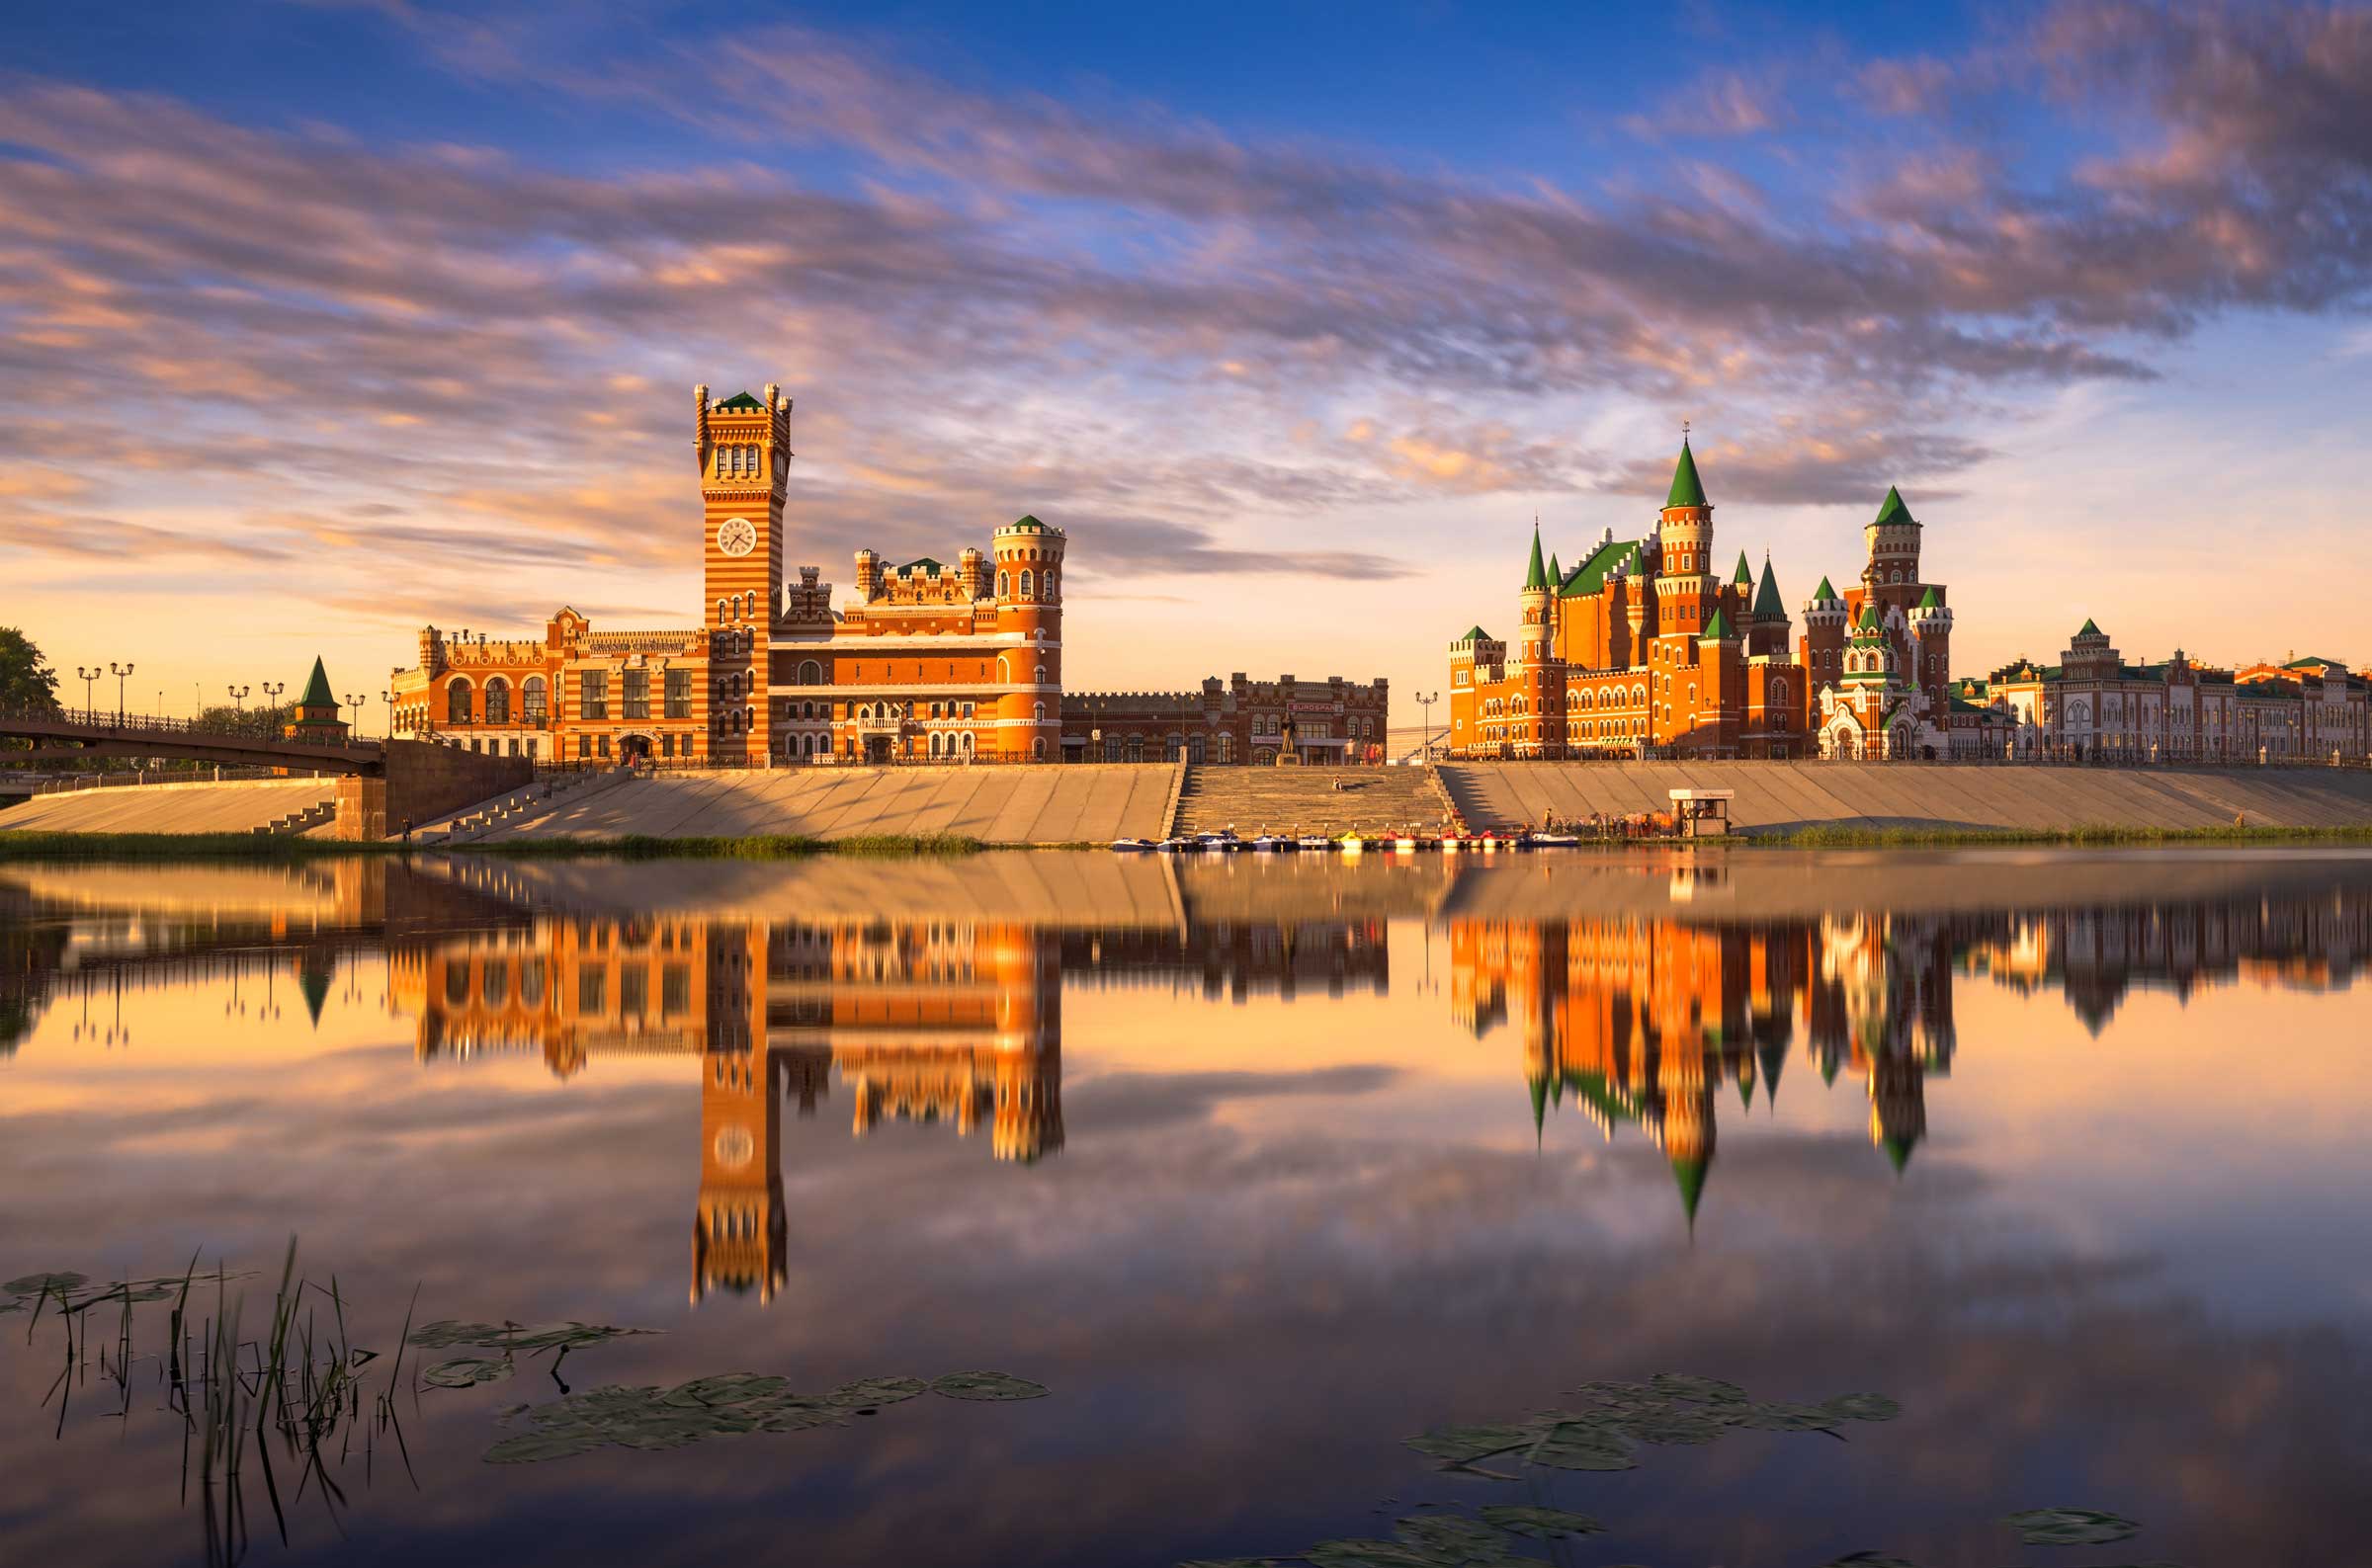 Stately medieval buildings on the banks of a river in Russia